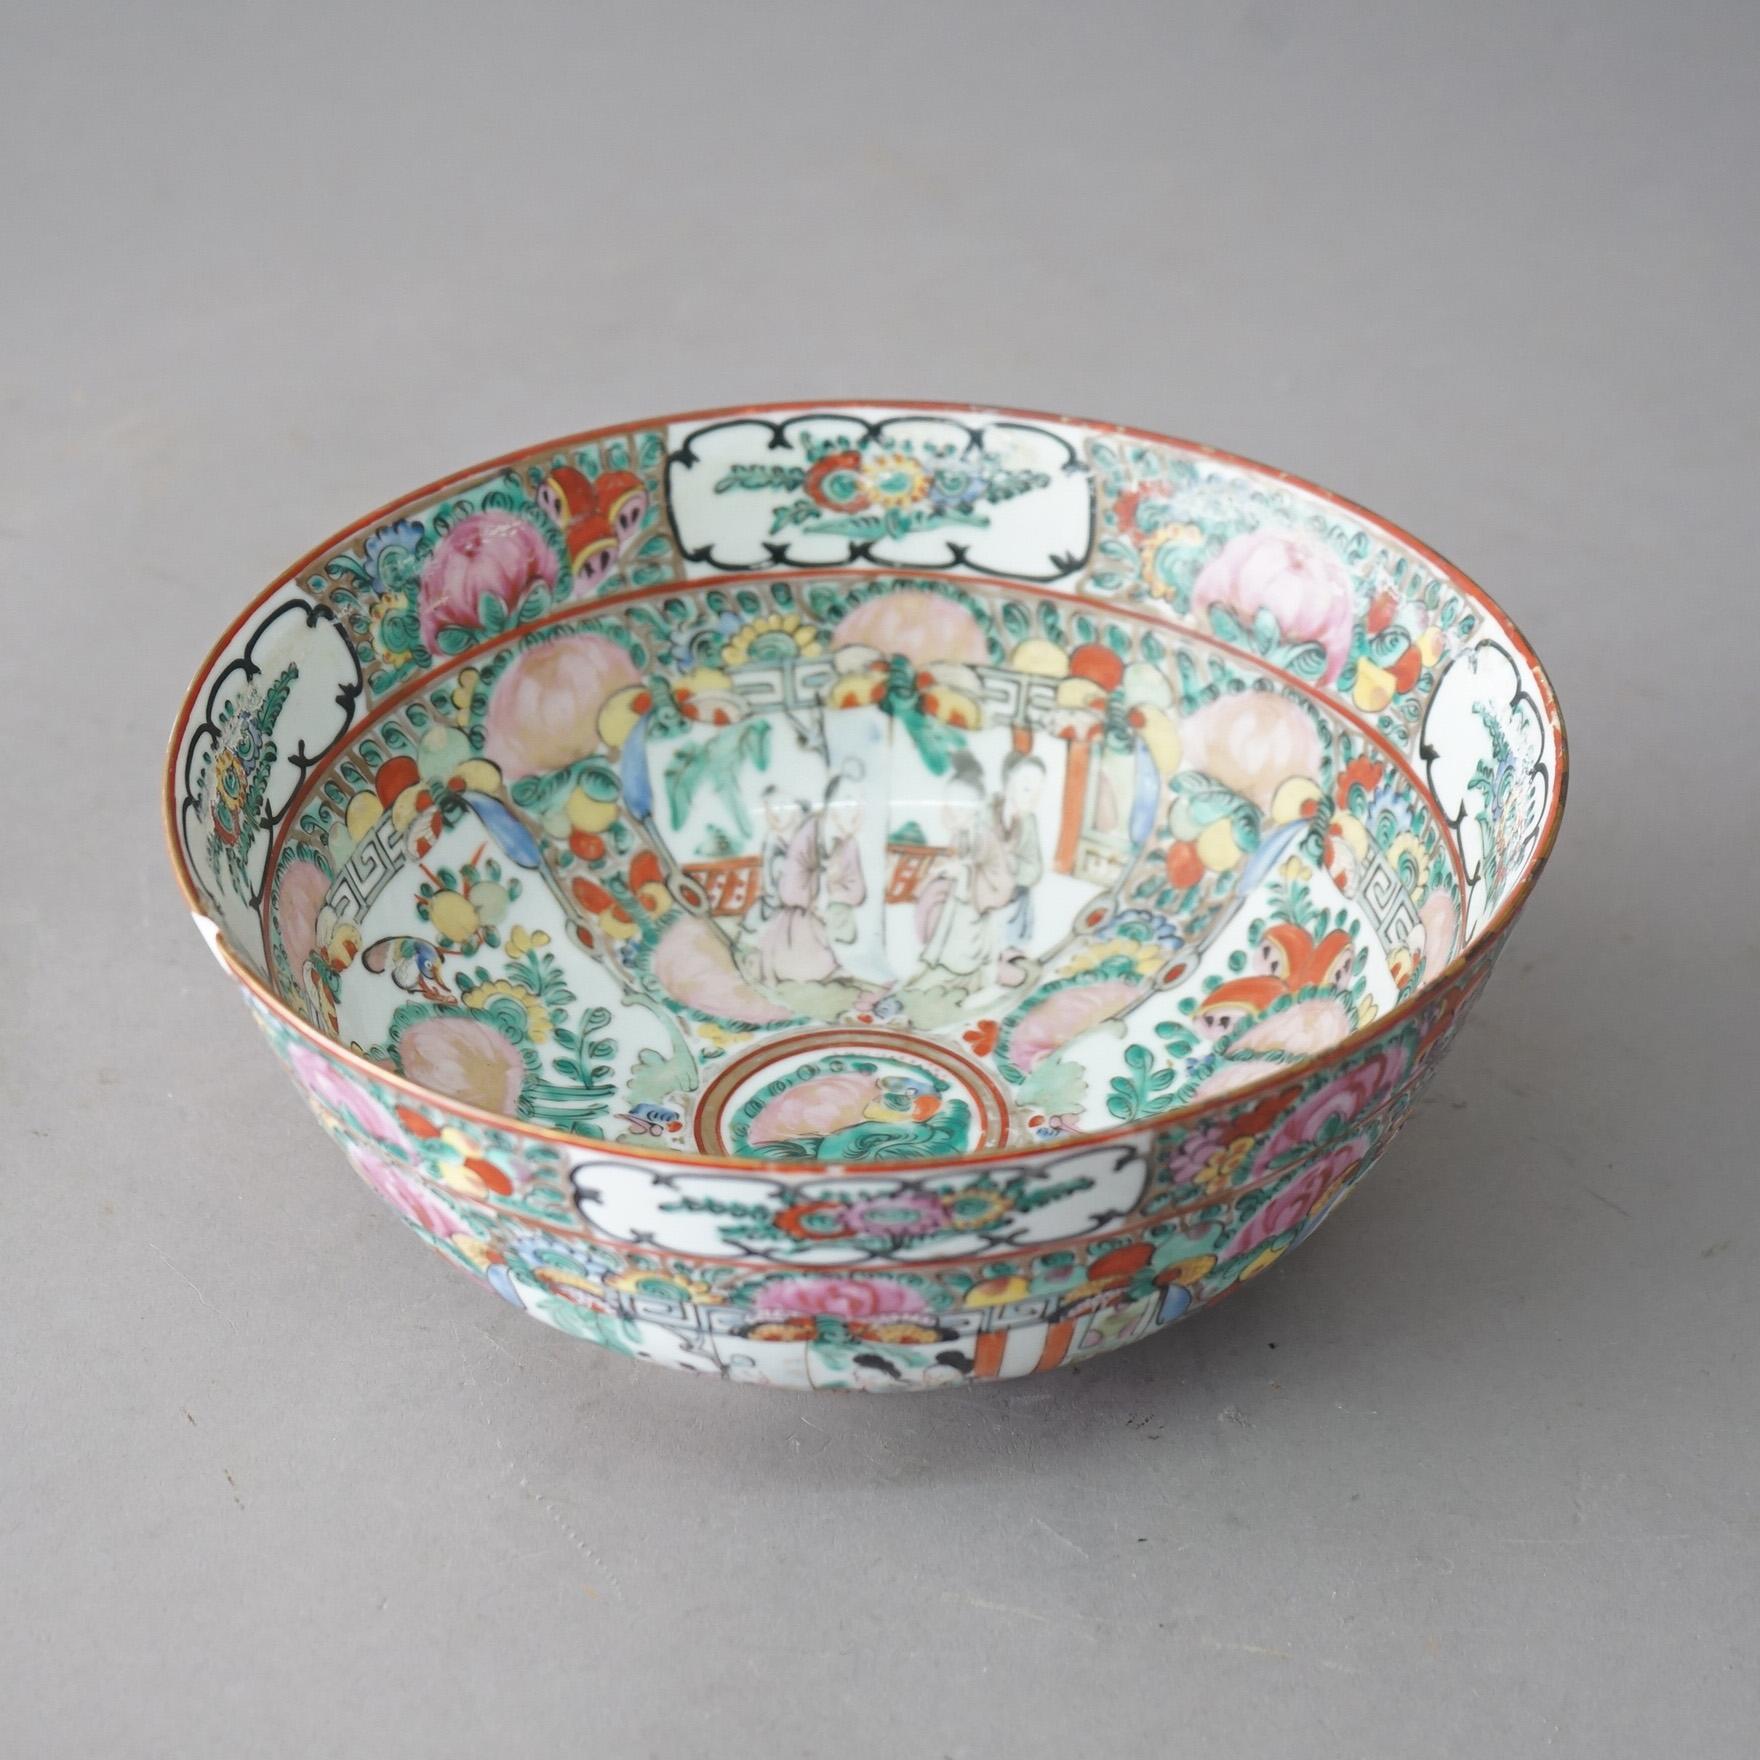 Hand-Painted Antique Chinese Rose Medallion Porcelain Bowl Circa 1920